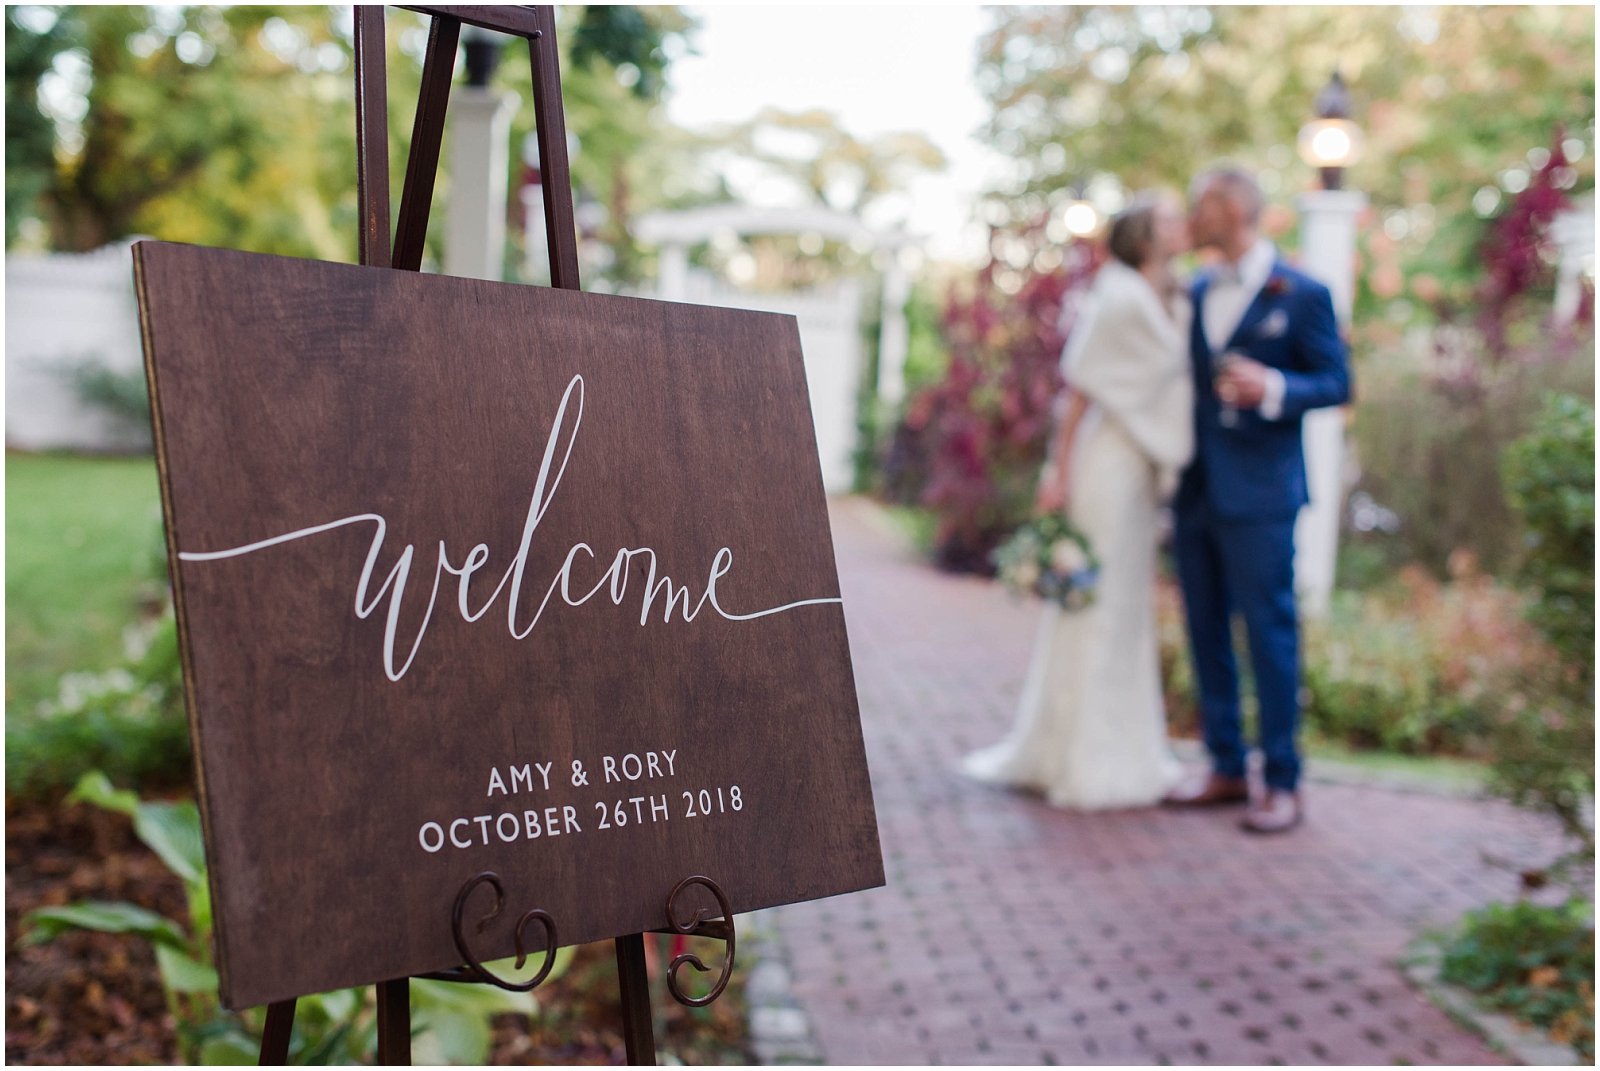 welcome sign for this fall wedding at the Dan'l Webster Inn.